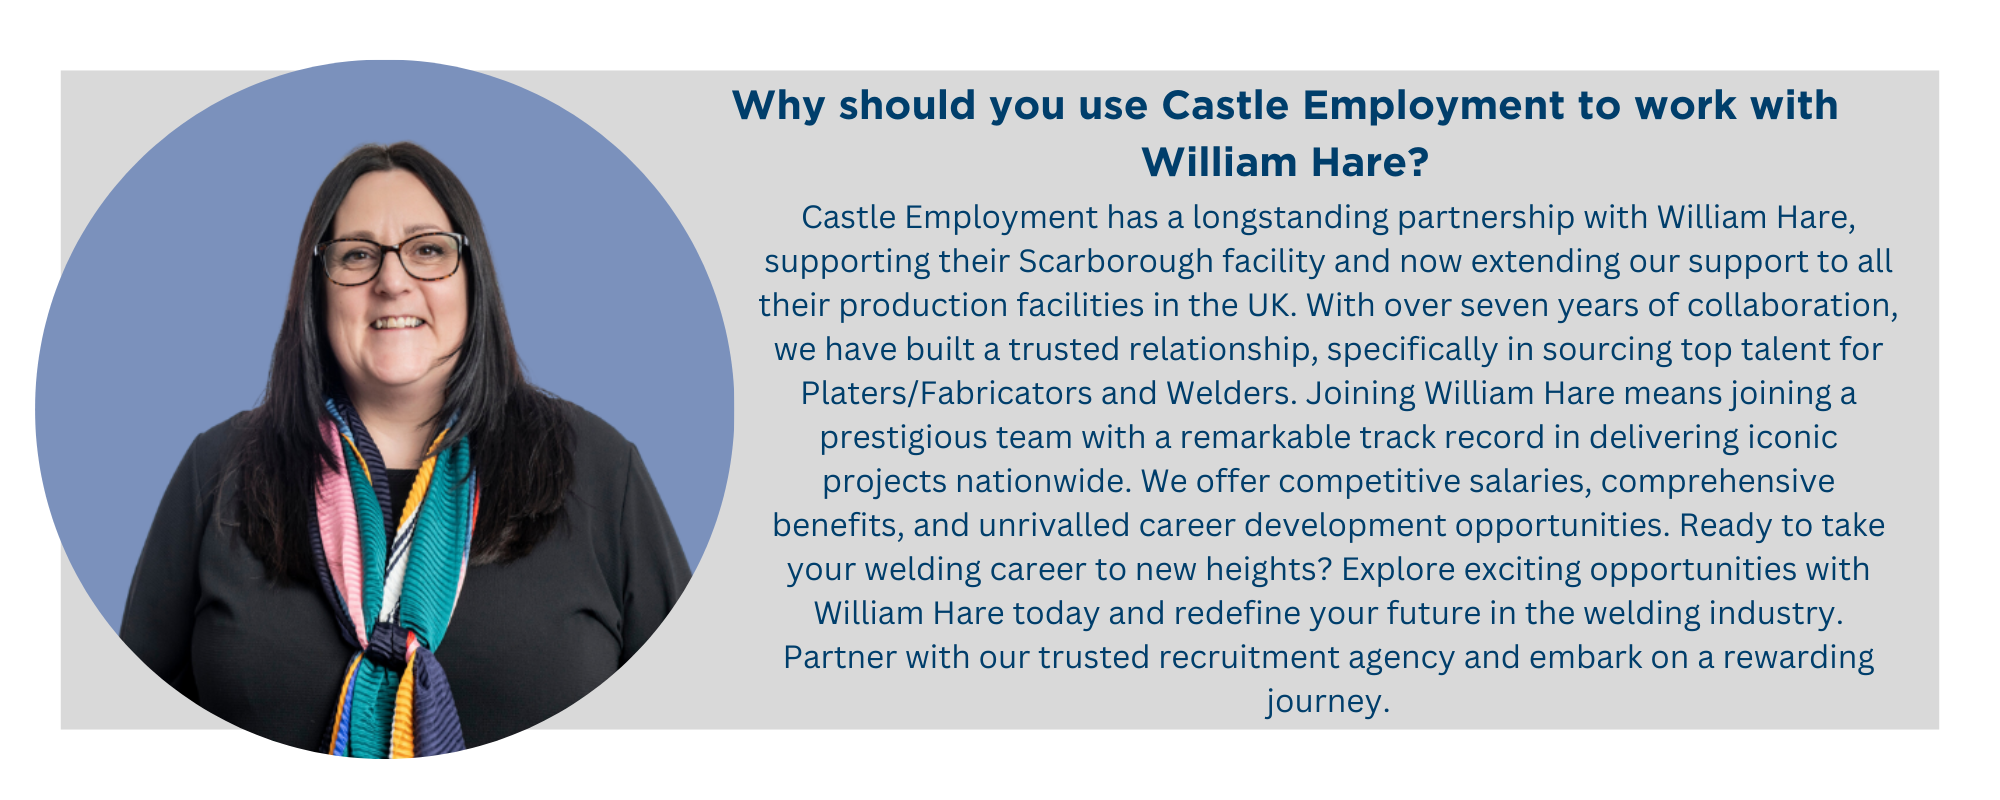 Castle employment and William Hare